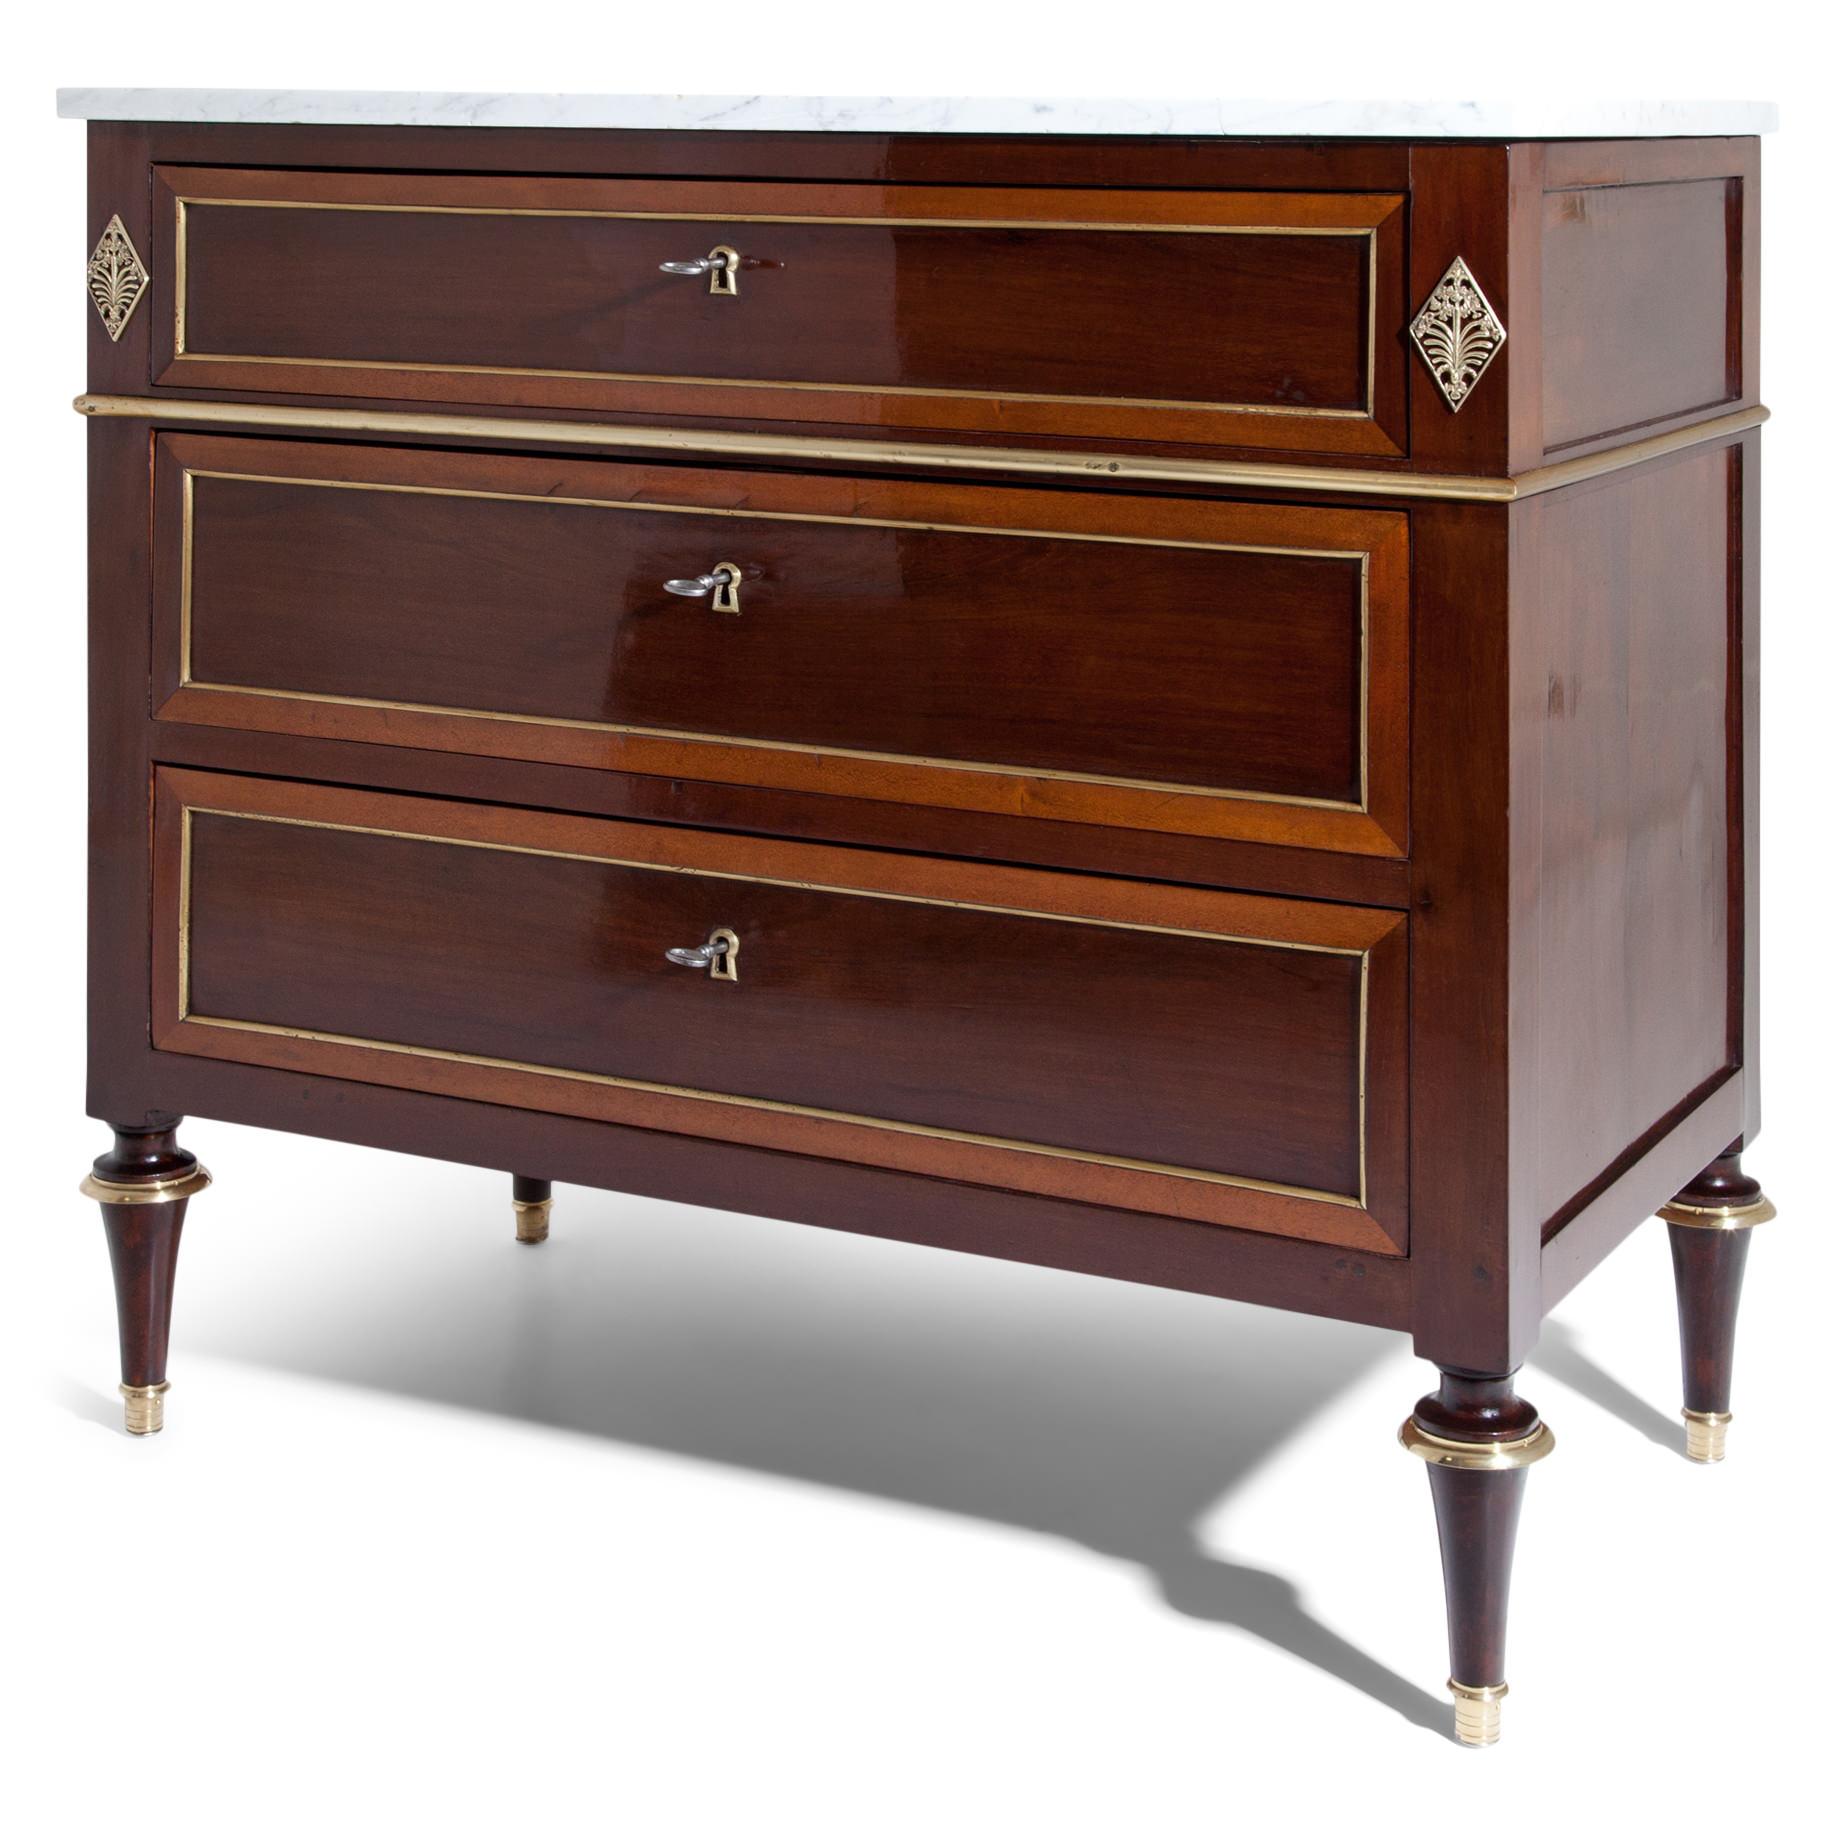 Three-drawered mahogany chest of drawers on conical feet with brass details, the fillings on the drawers are also framed with brass strips. The top drawer is slightly different in size and optically set off by a brass profile and fittings. The body